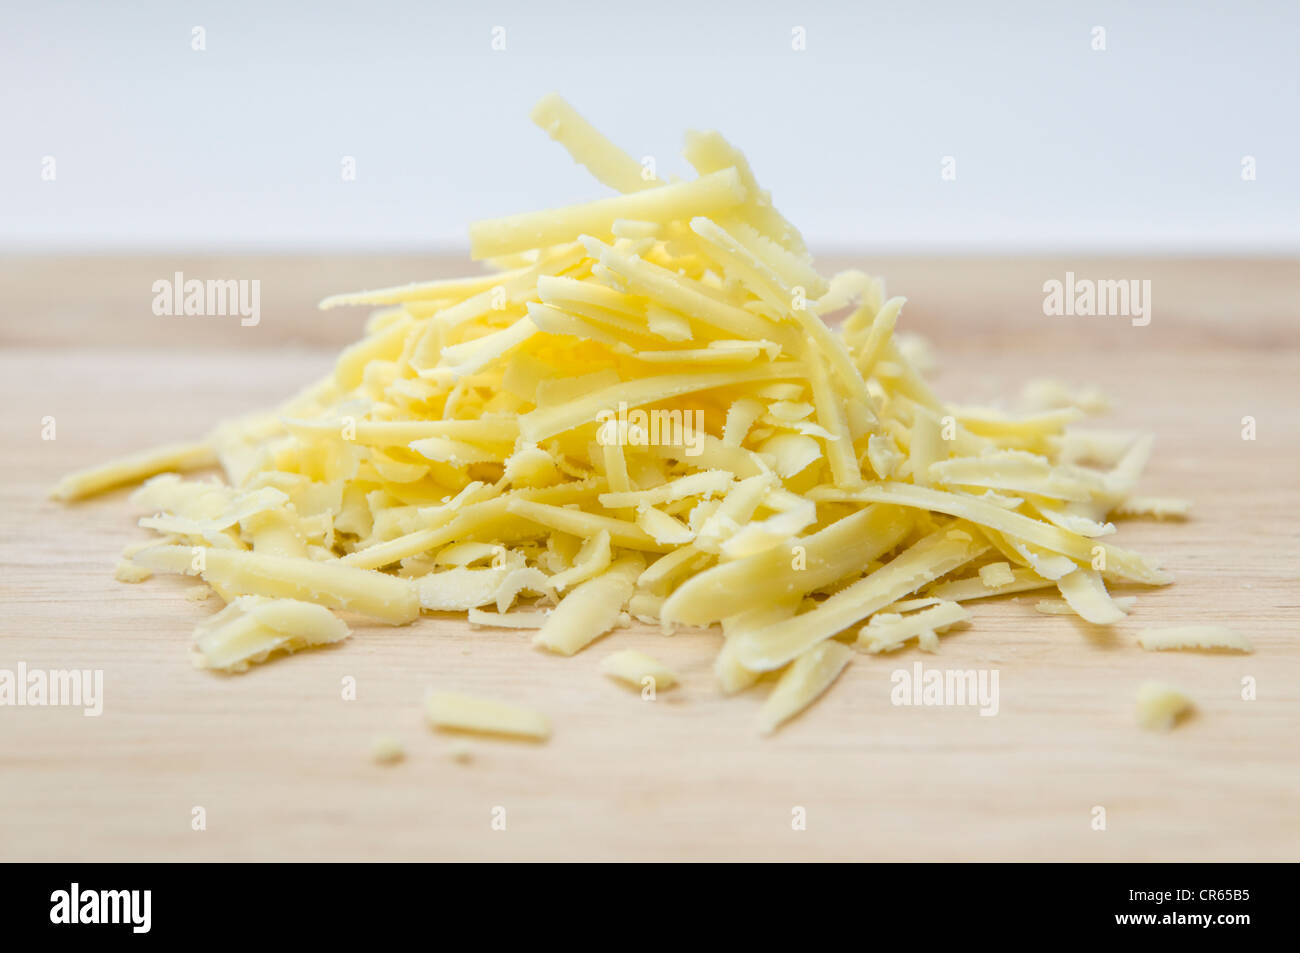 Grated cheese on wooden chopping board against white background Stock Photo